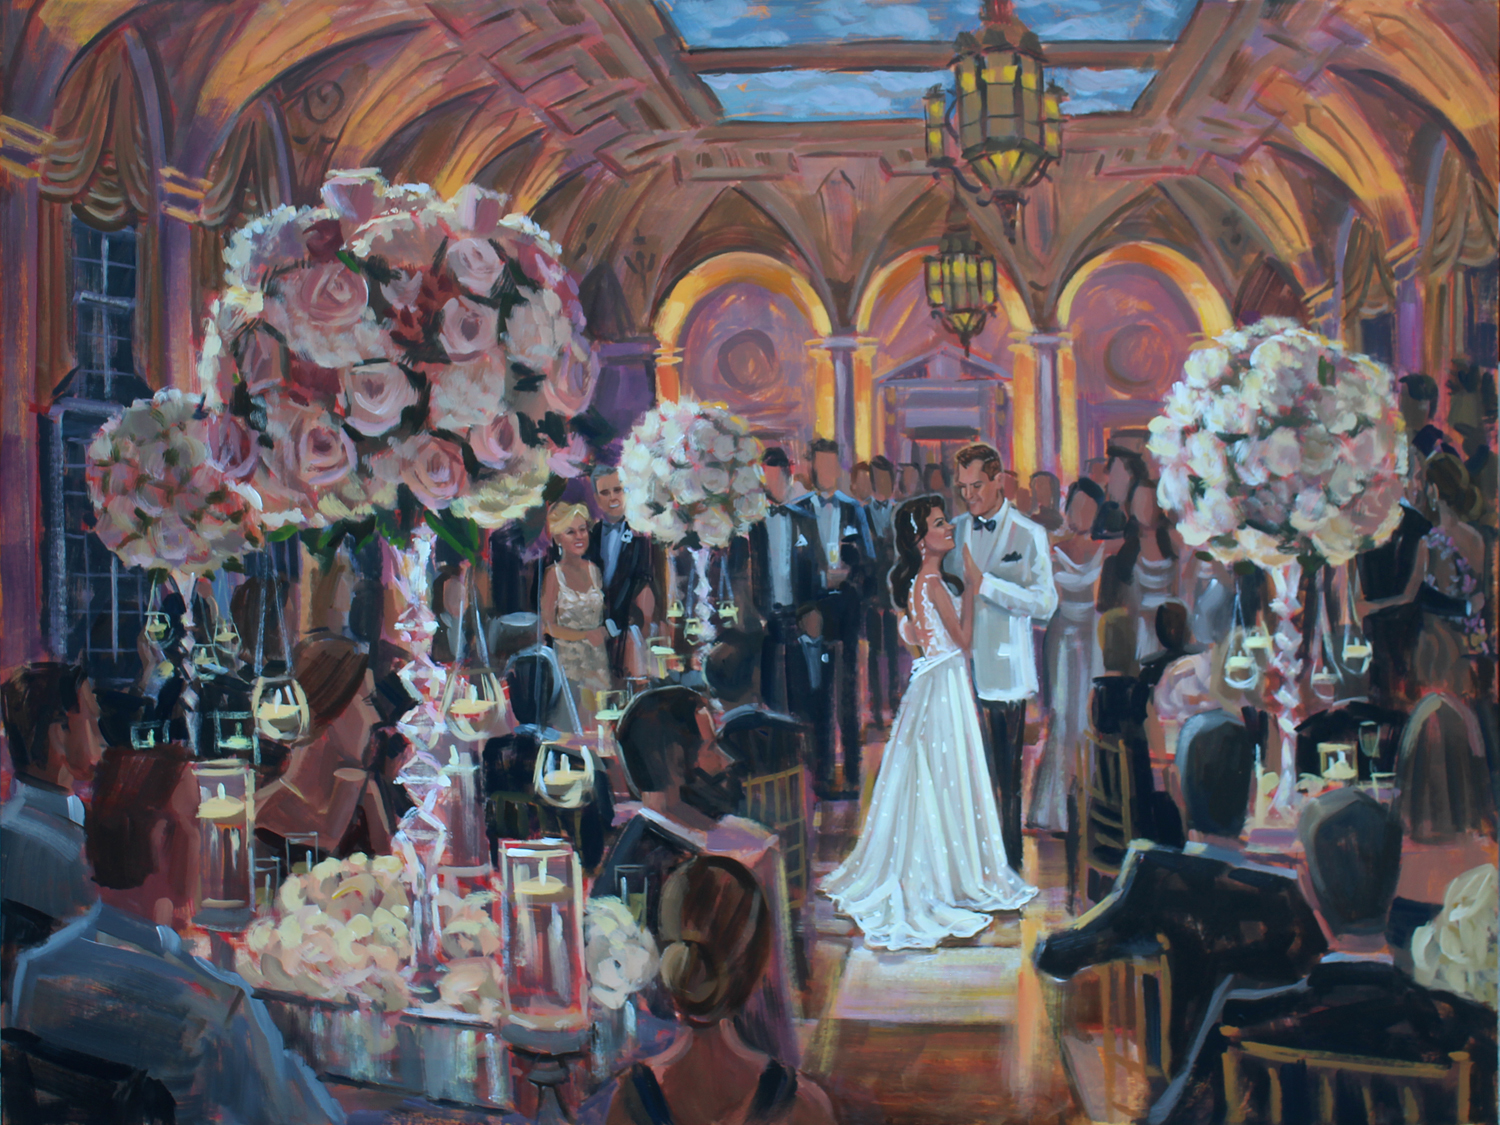 Live Wedding Painter, Ben Keys, captured Laura + Jonathan's spectacular first dance at The Breakers resort in Palm Beach, FL.